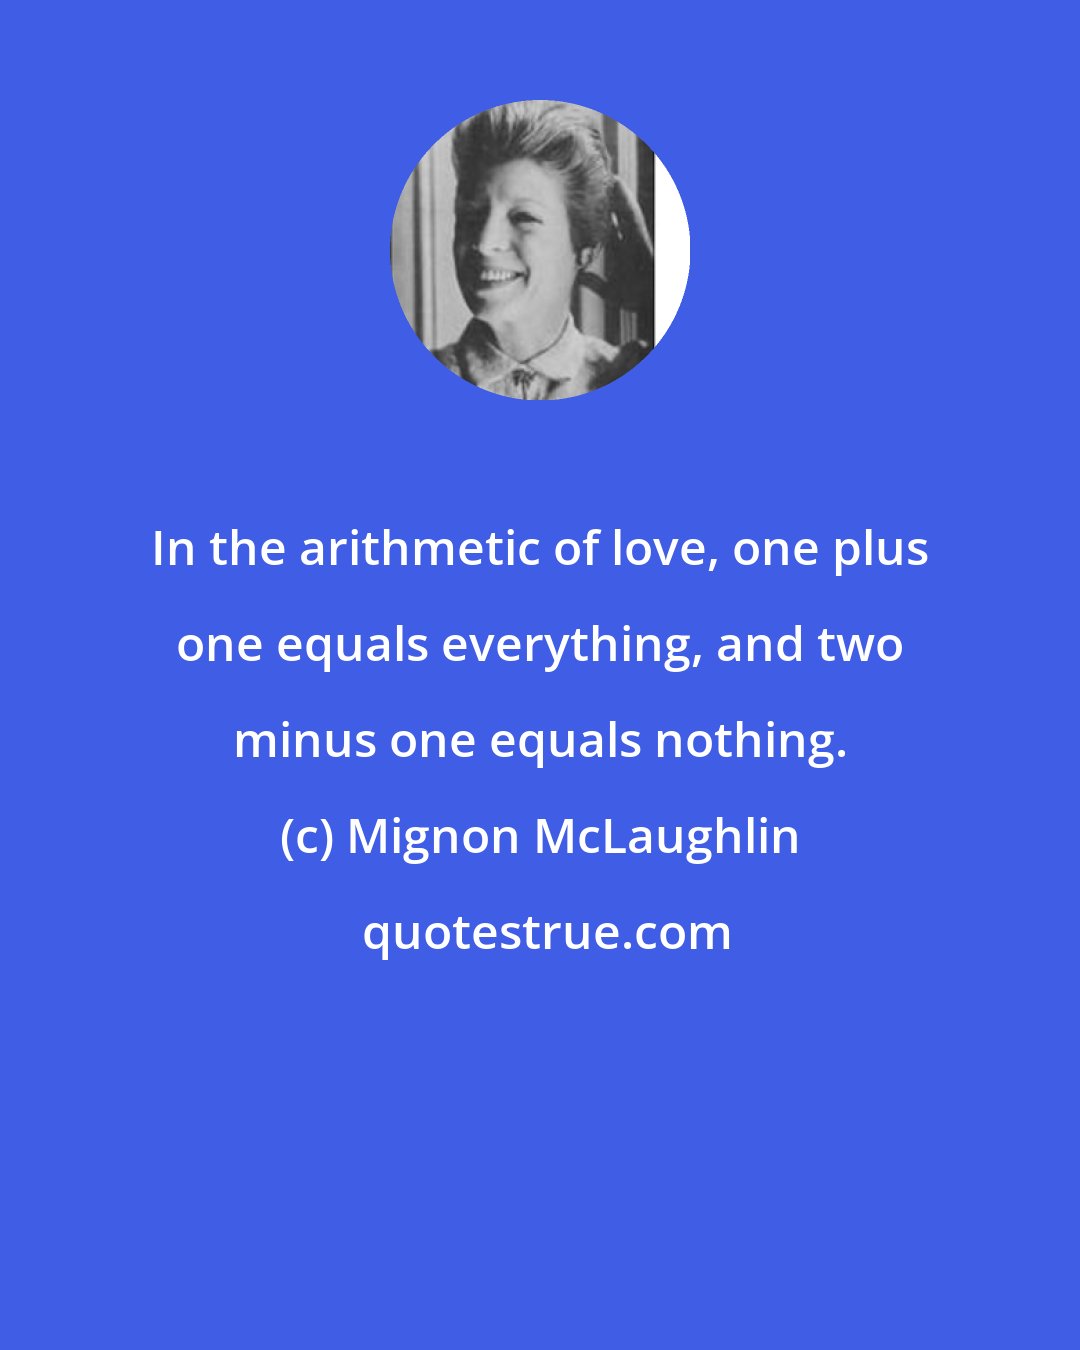 Mignon McLaughlin: In the arithmetic of love, one plus one equals everything, and two minus one equals nothing.